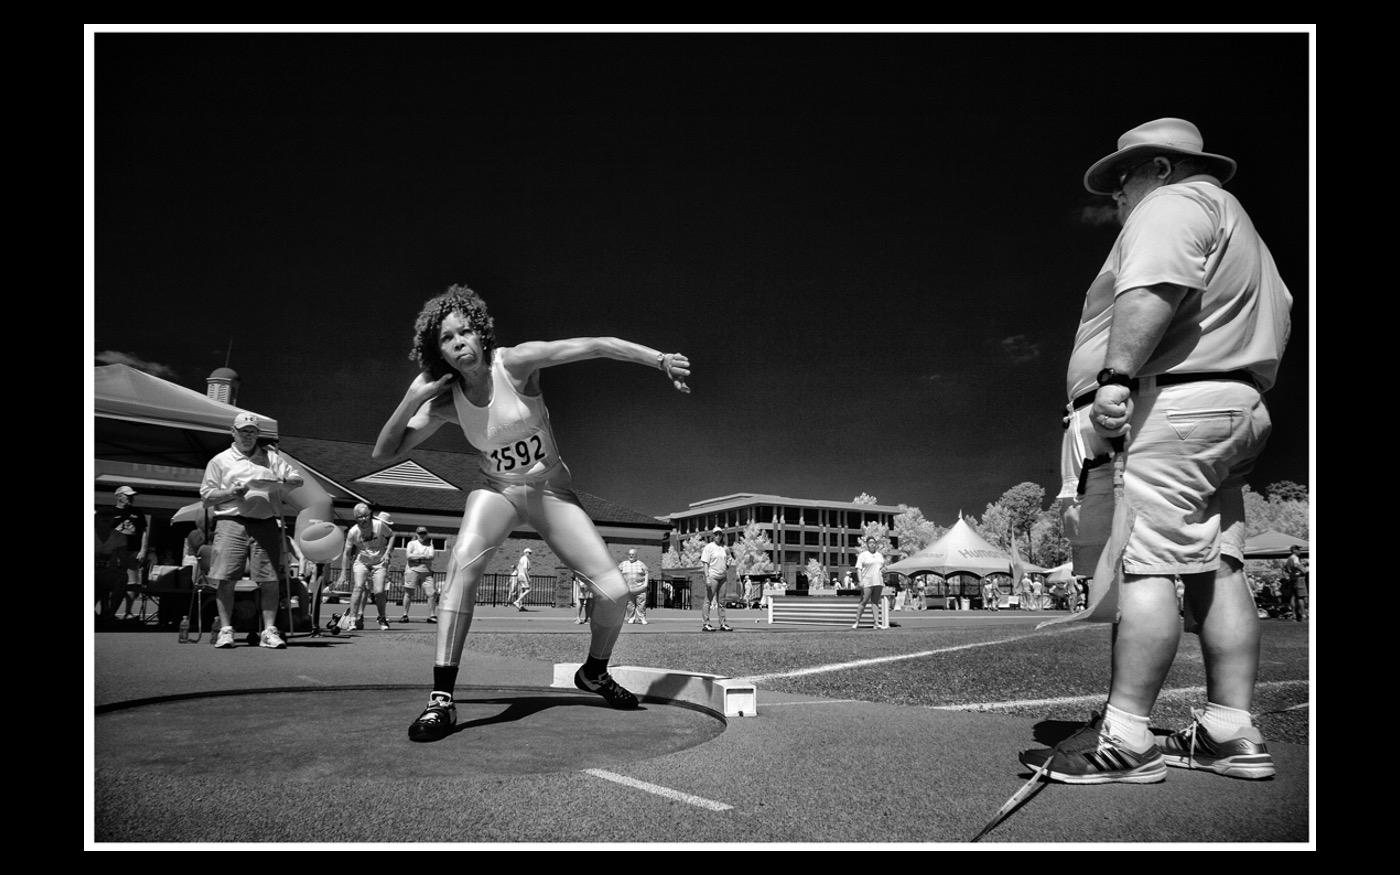 Women compete in all the sports:  Shot put  National Senior Games  2019 : Looking Back: 60 Years of Photographs : David Burnett | Photographer